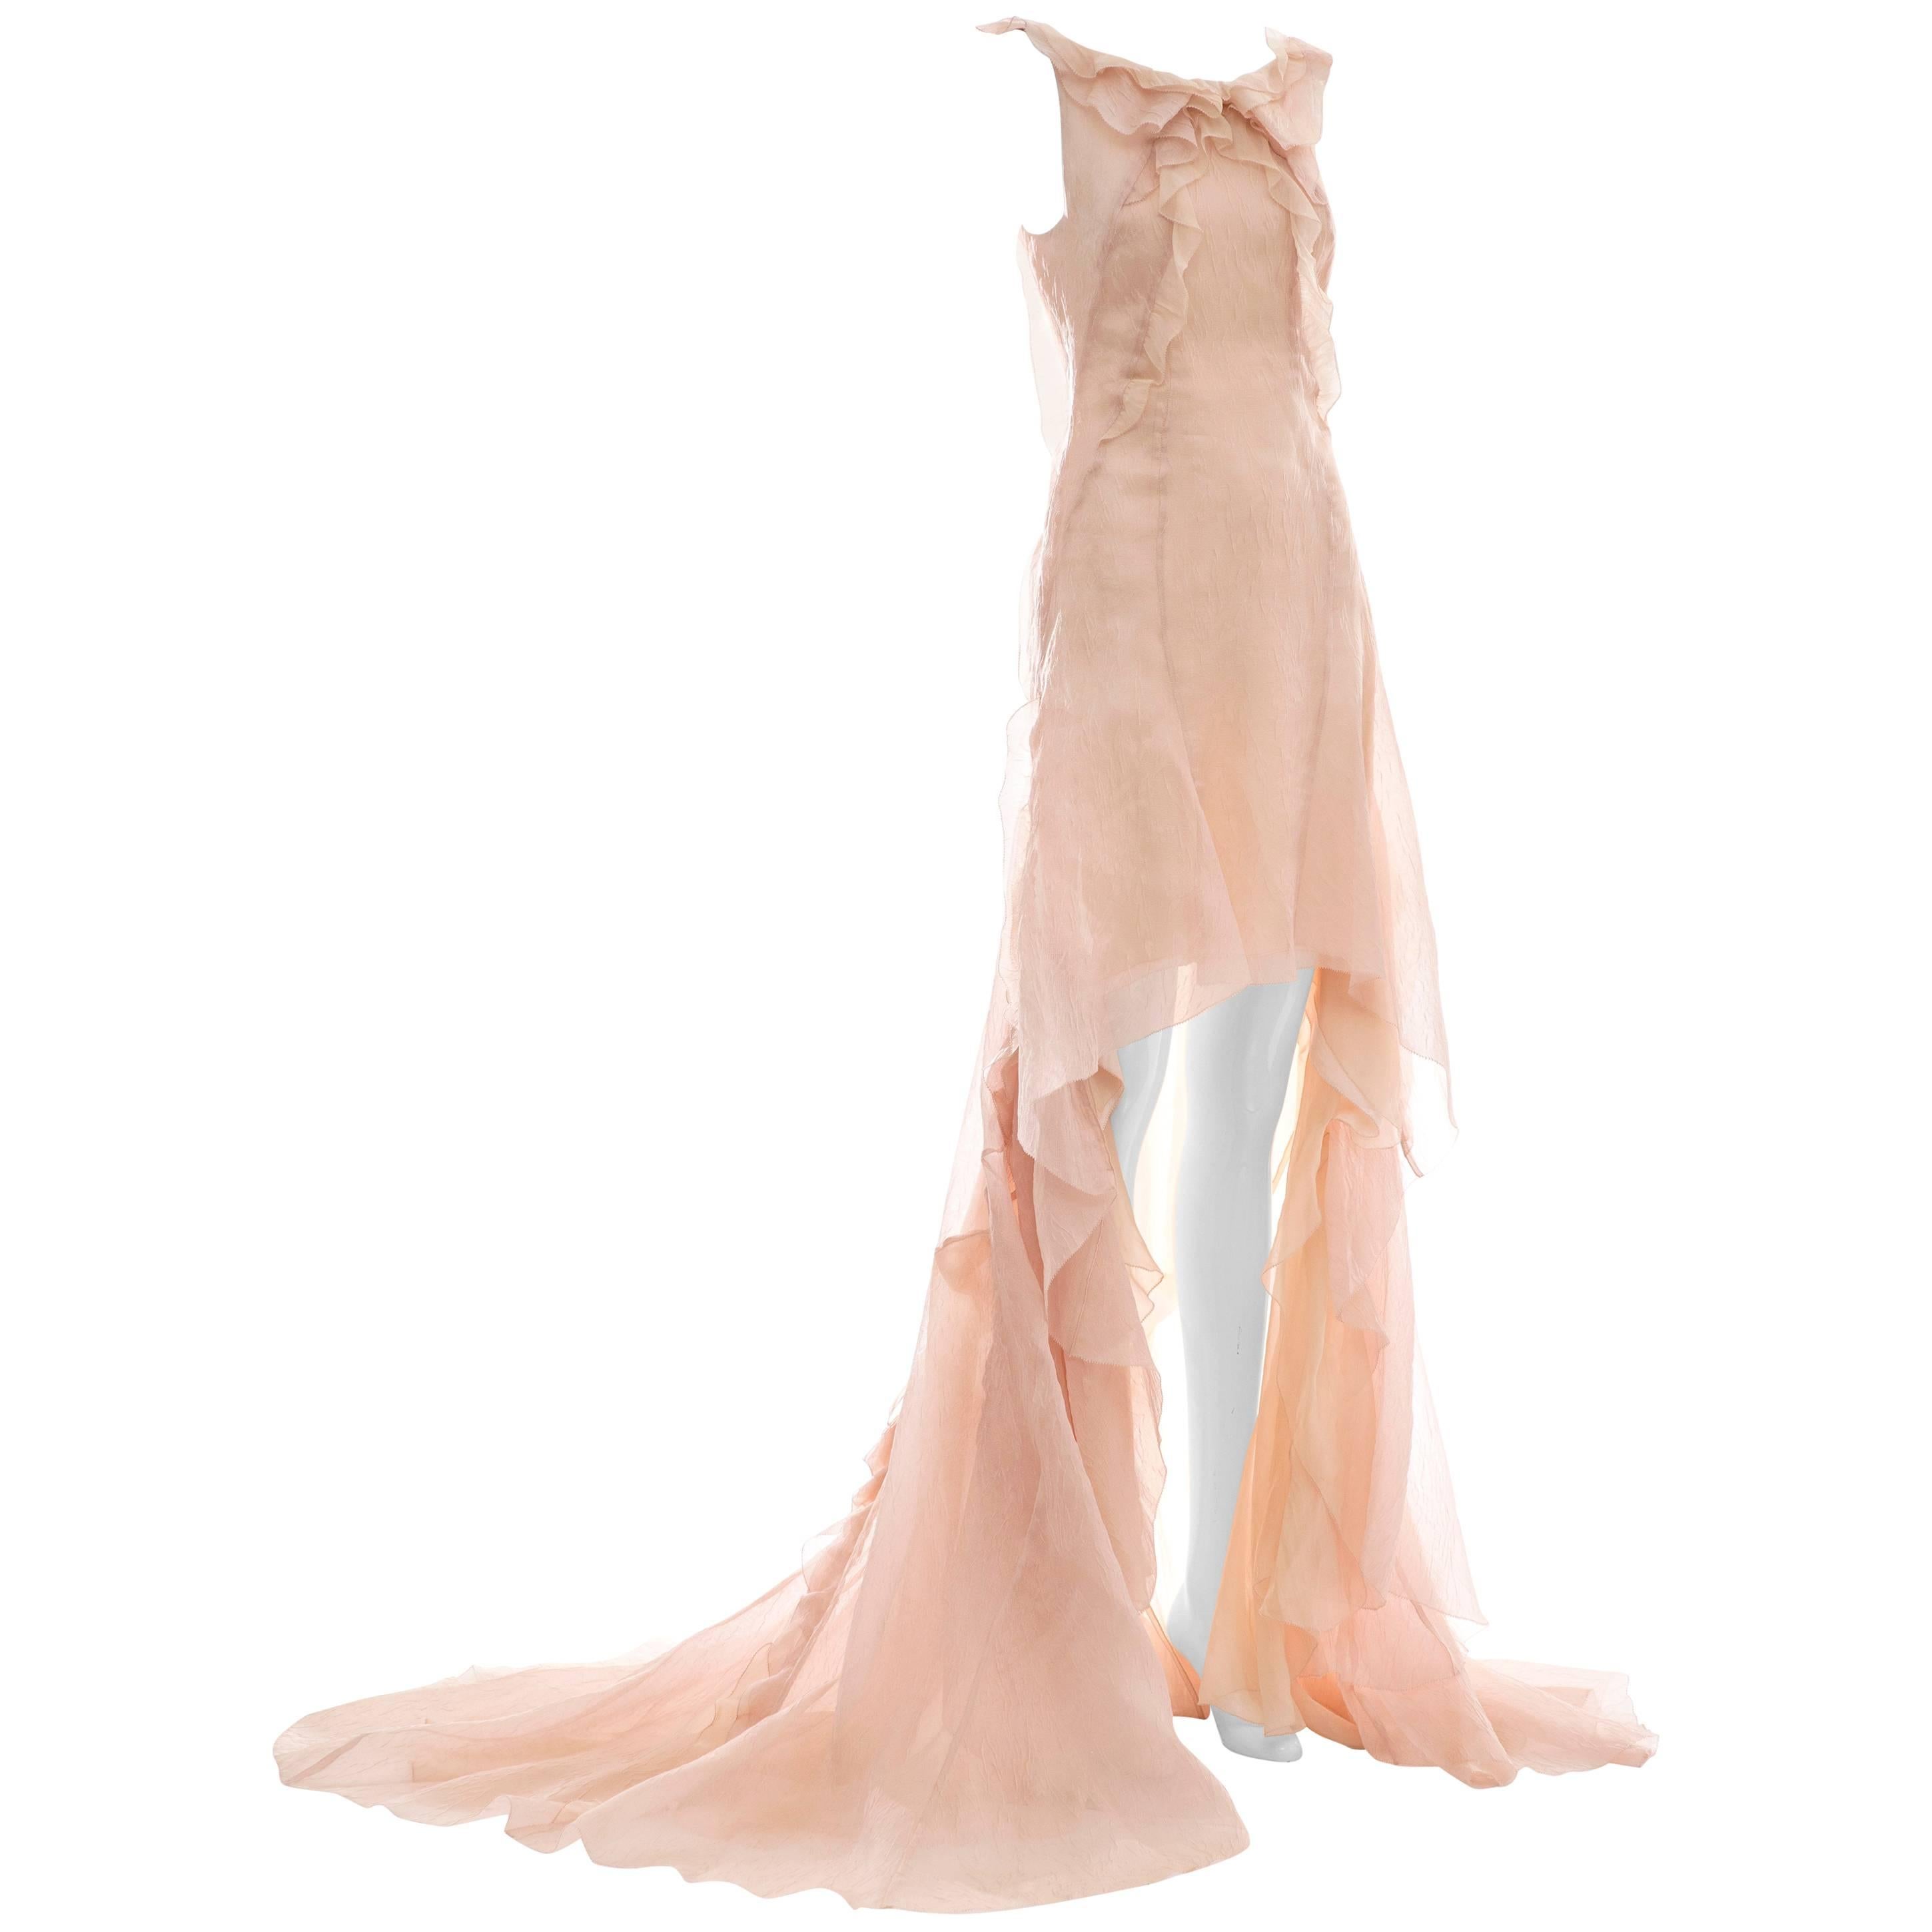 Olivier Theyskens for Nina Ricci, Spring-Summer 2009 blush silk nylon sleeveless evening dress with bateau neckline, ruffled accent throughout, high-low hemline featuring picot edges, open back with hook-and-eye closures and concealed zip closure at